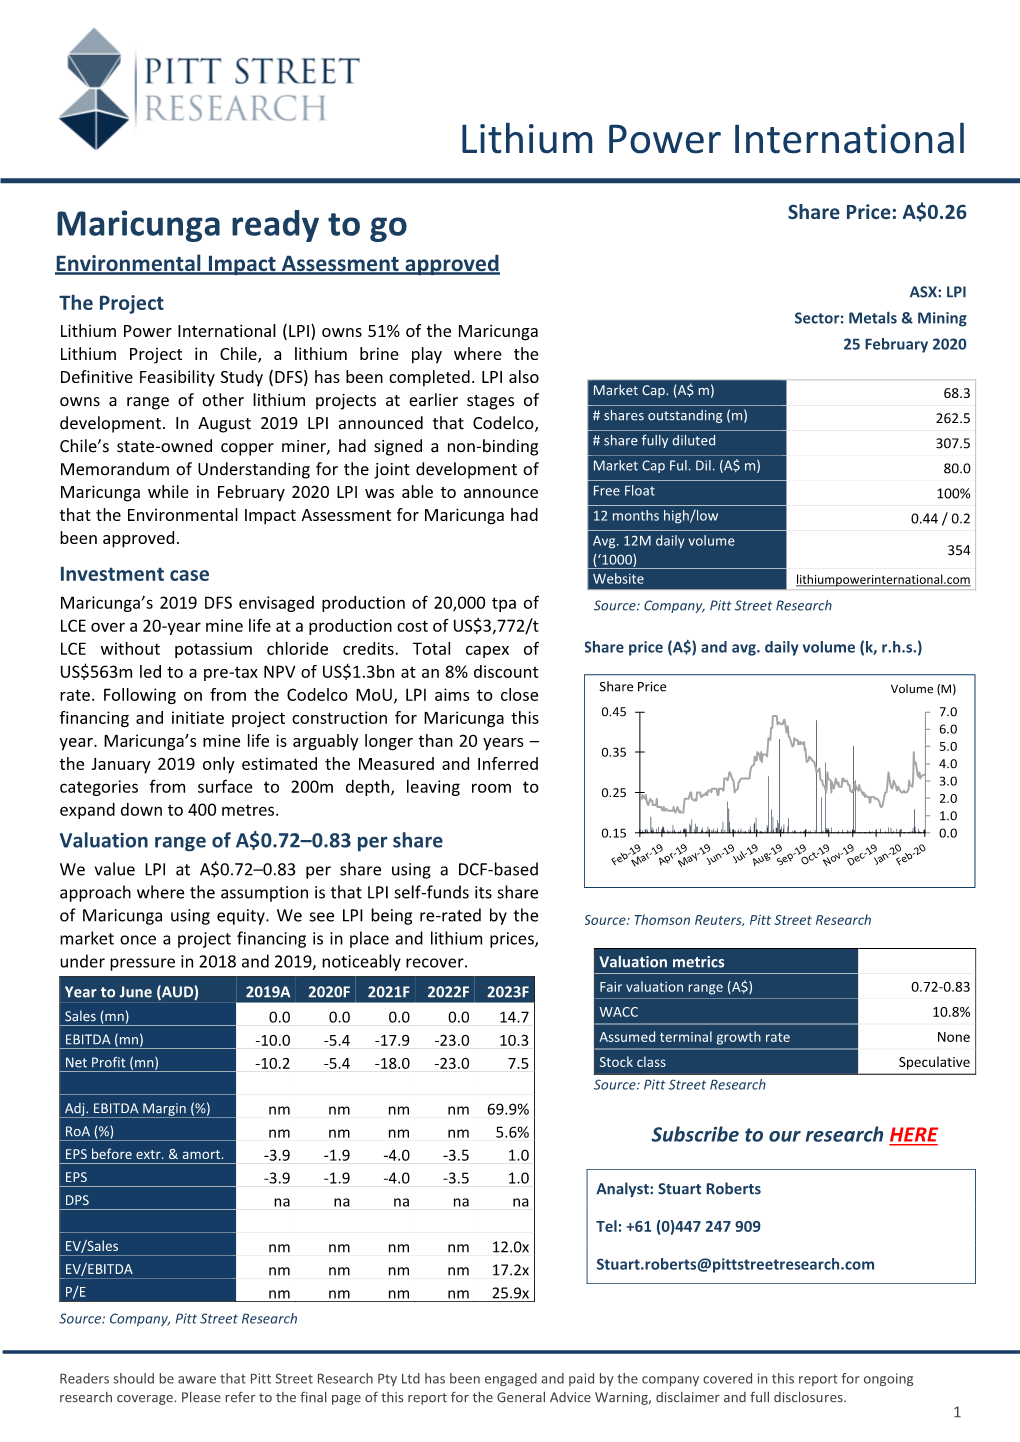 Maricunga Ready to Go Share Price: A$0.26 Environmental Impact Assessment Approved